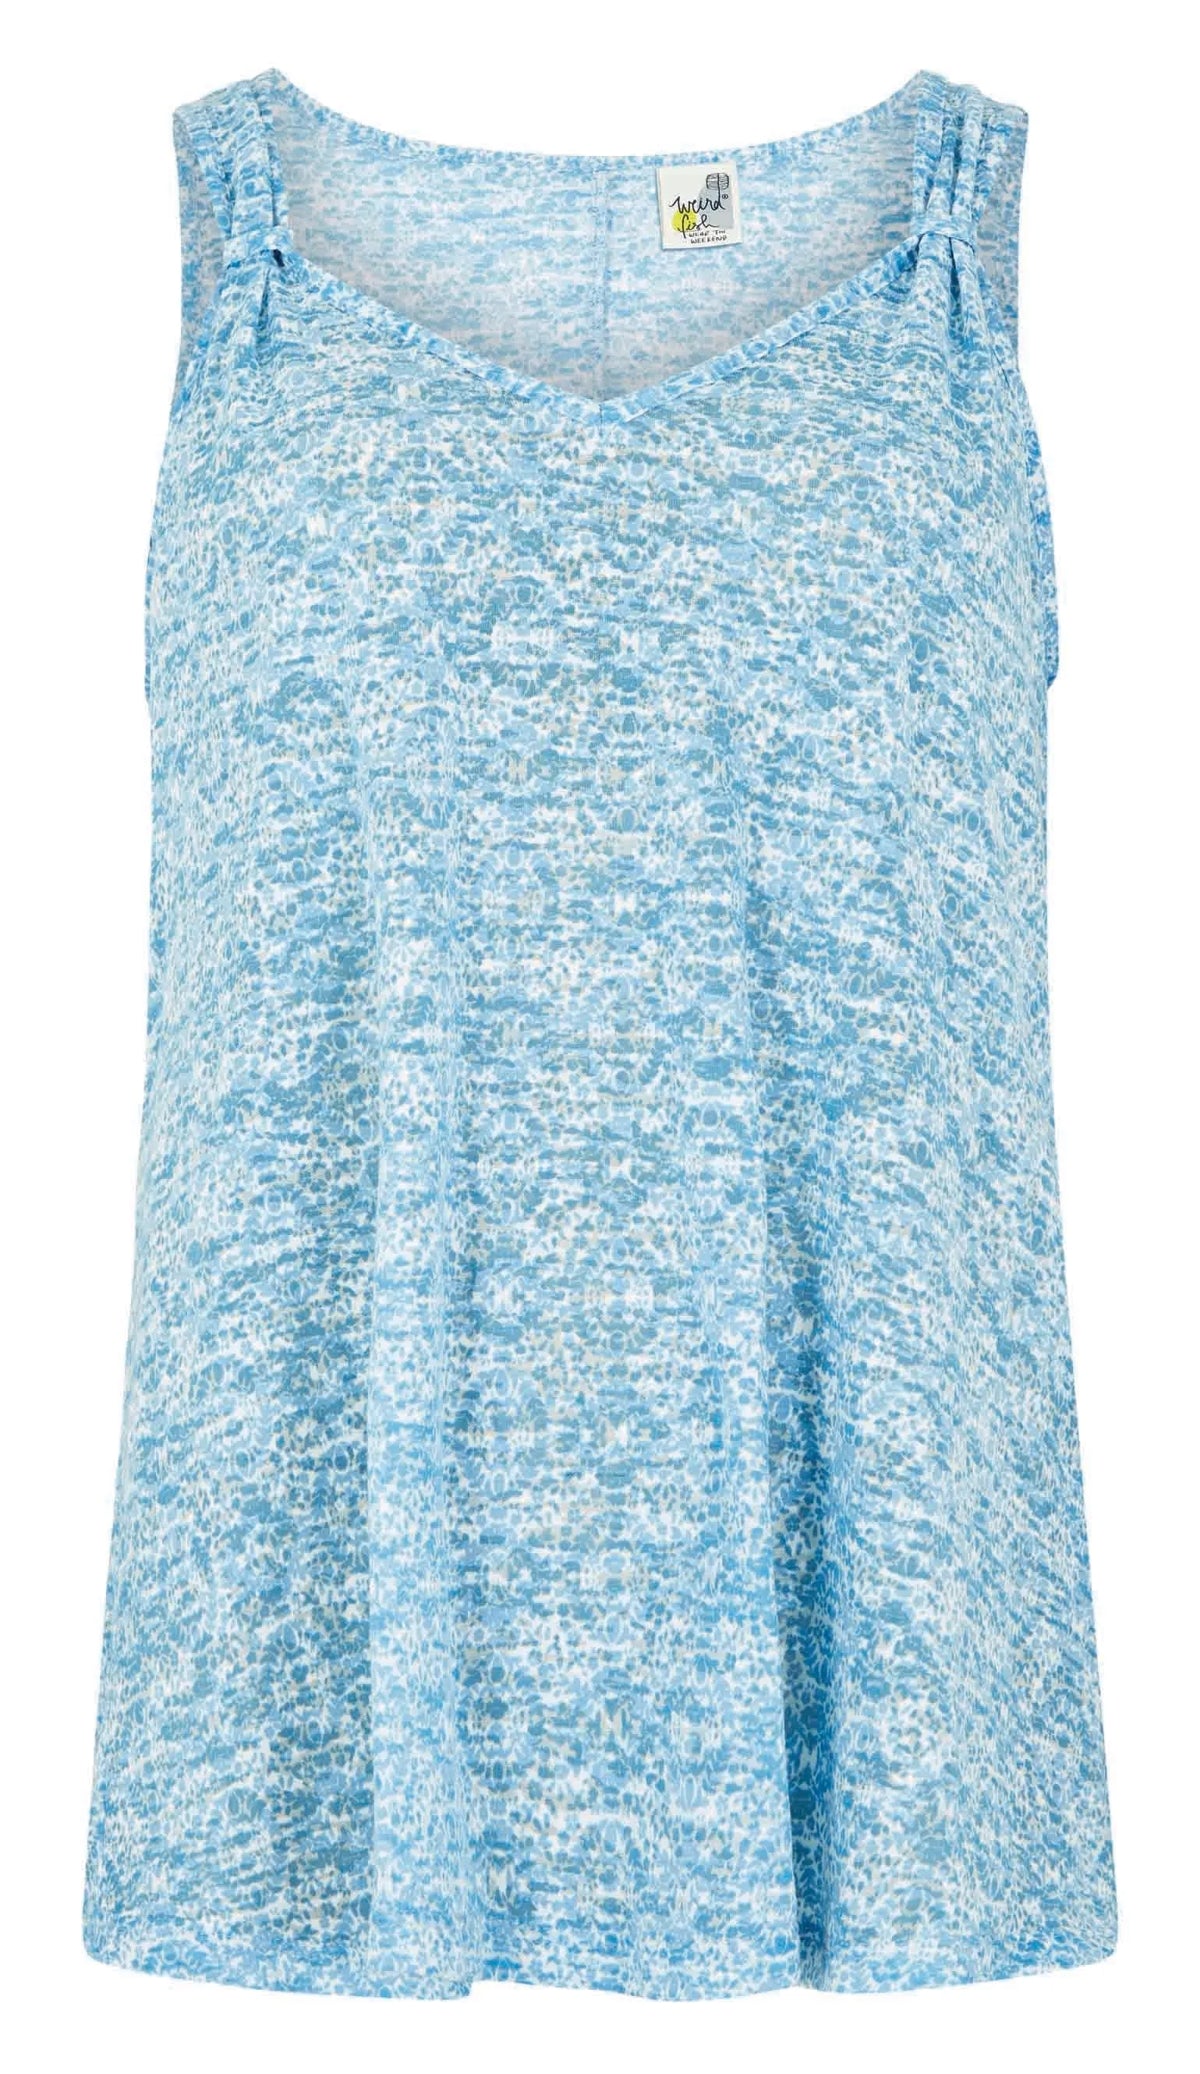 Women's Aliana burnout fabric vest in Blue Surf with gathered straps.